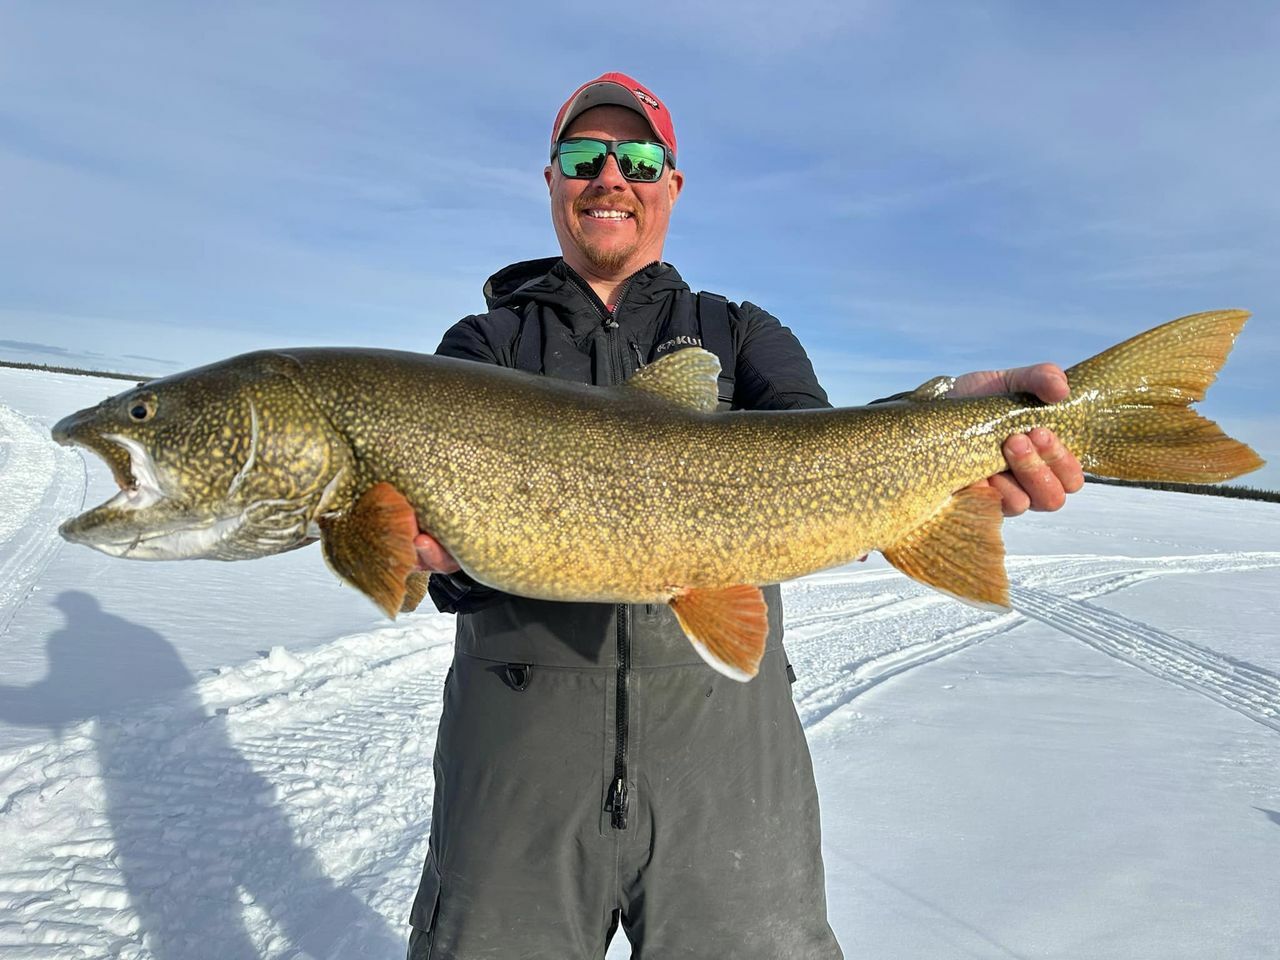 Great way to end the season for bait on Lake Louise